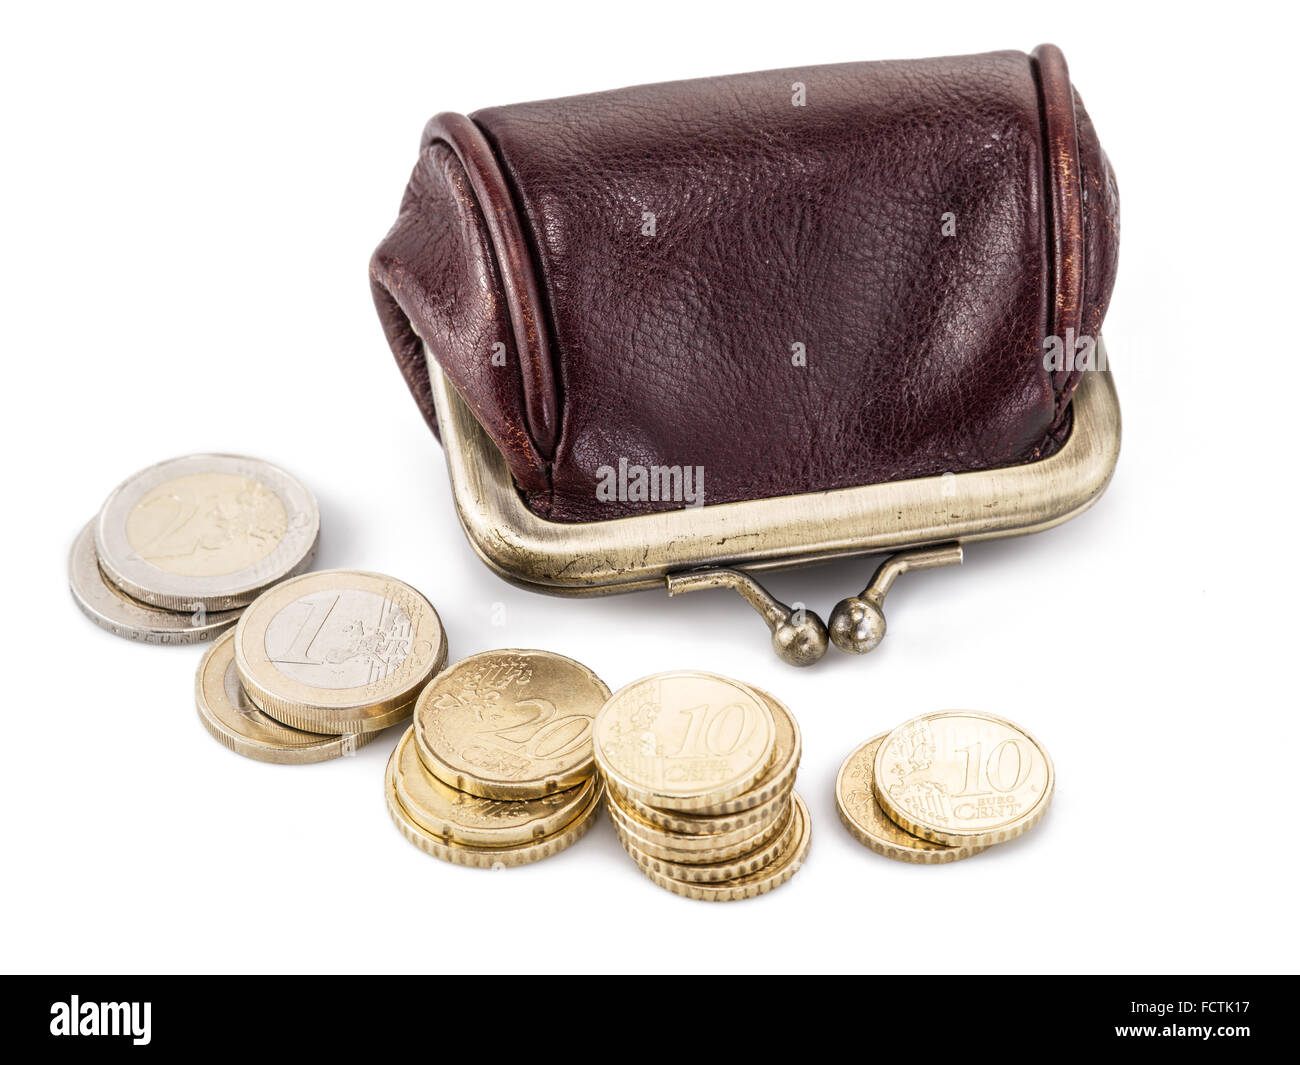 Small leather purse for coins and coins near it. Isolated on white background. Stock Photo